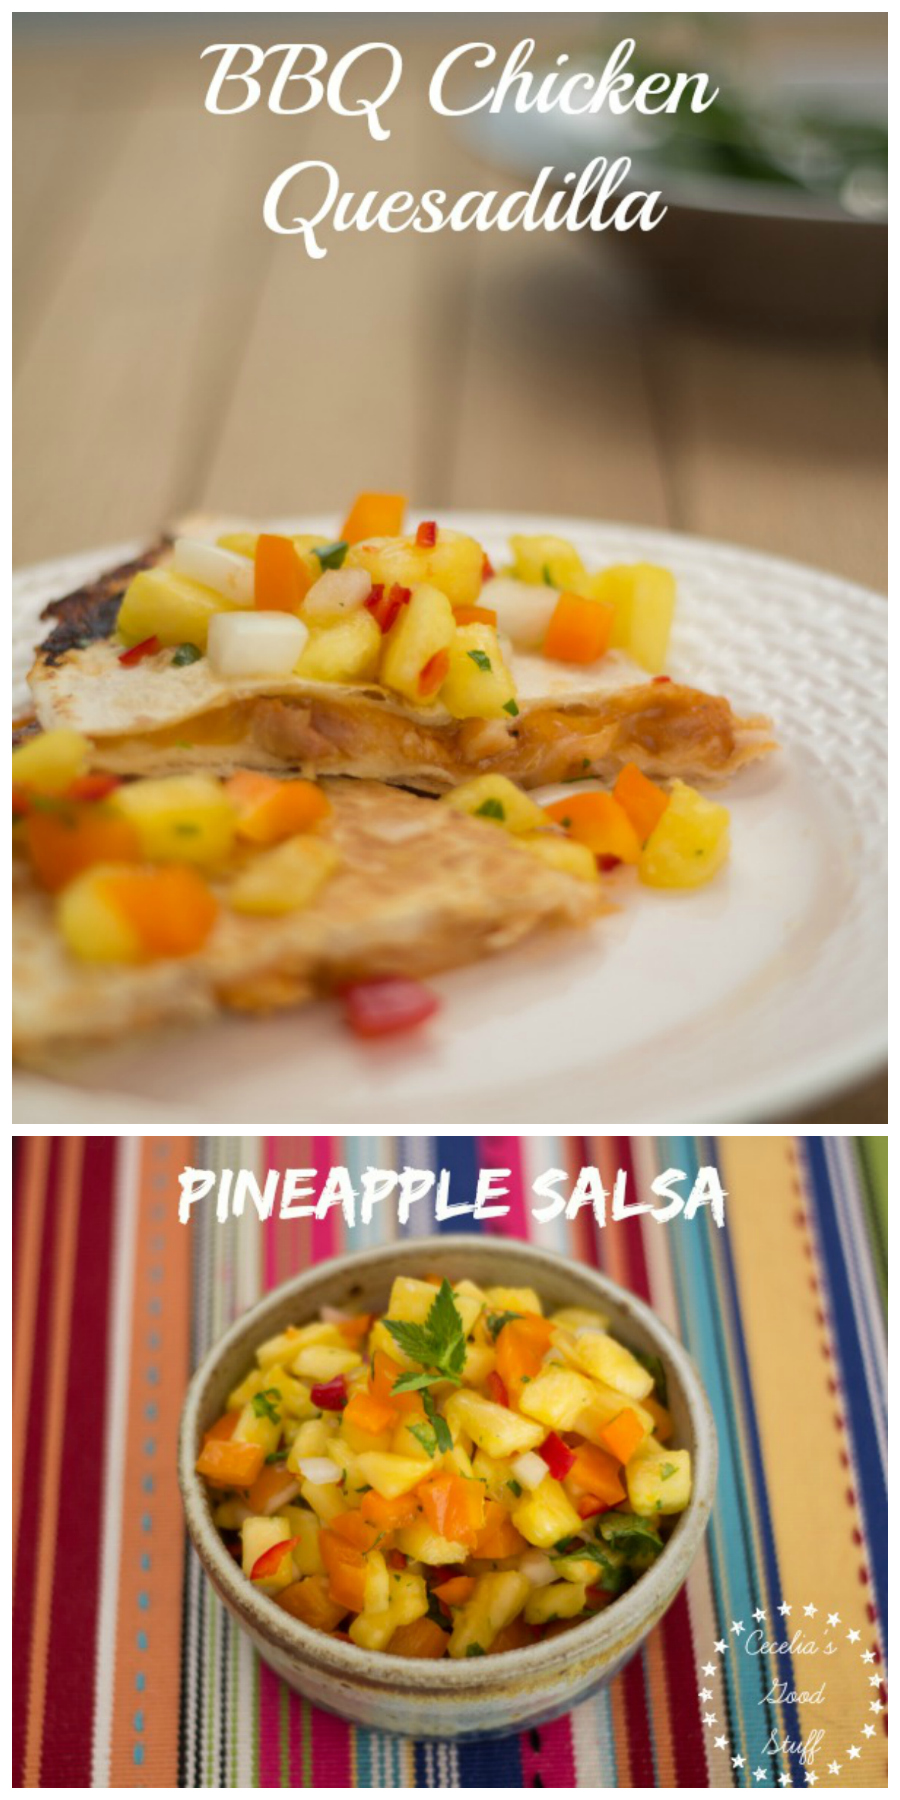 Barbecue Chicken Quesadillas with Pineapple Salsa | CeceliasGoodStuff.com | Good Food for Good People 